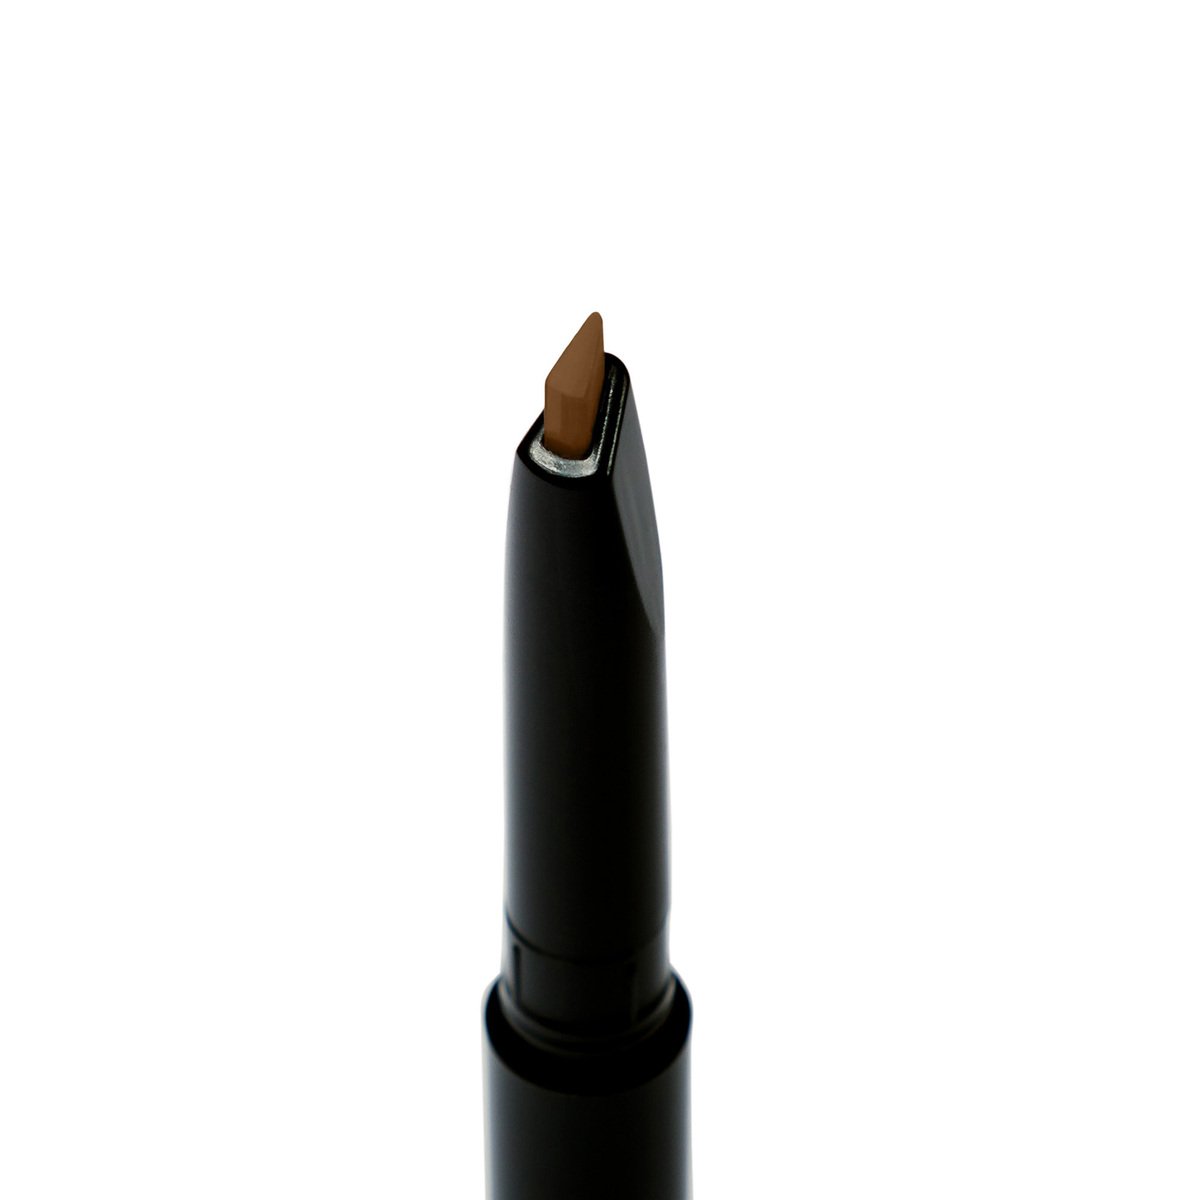 Wet And Wild Ultimate Brow Retractable Pencil - Medium Brown WnW00E627A 1pc